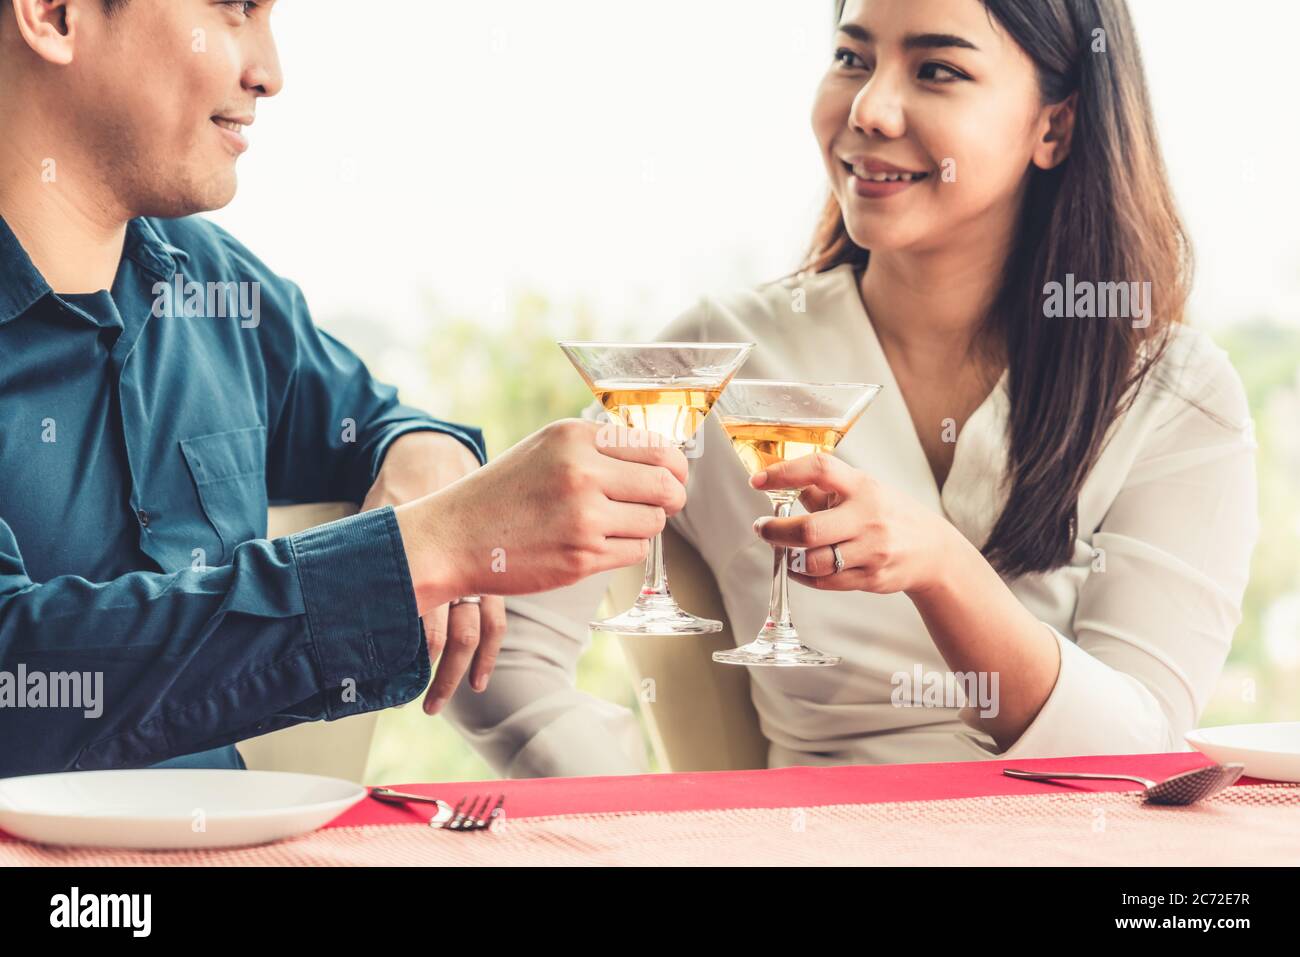 Happy romantic couple eating lunch at restaurant Stock Photo